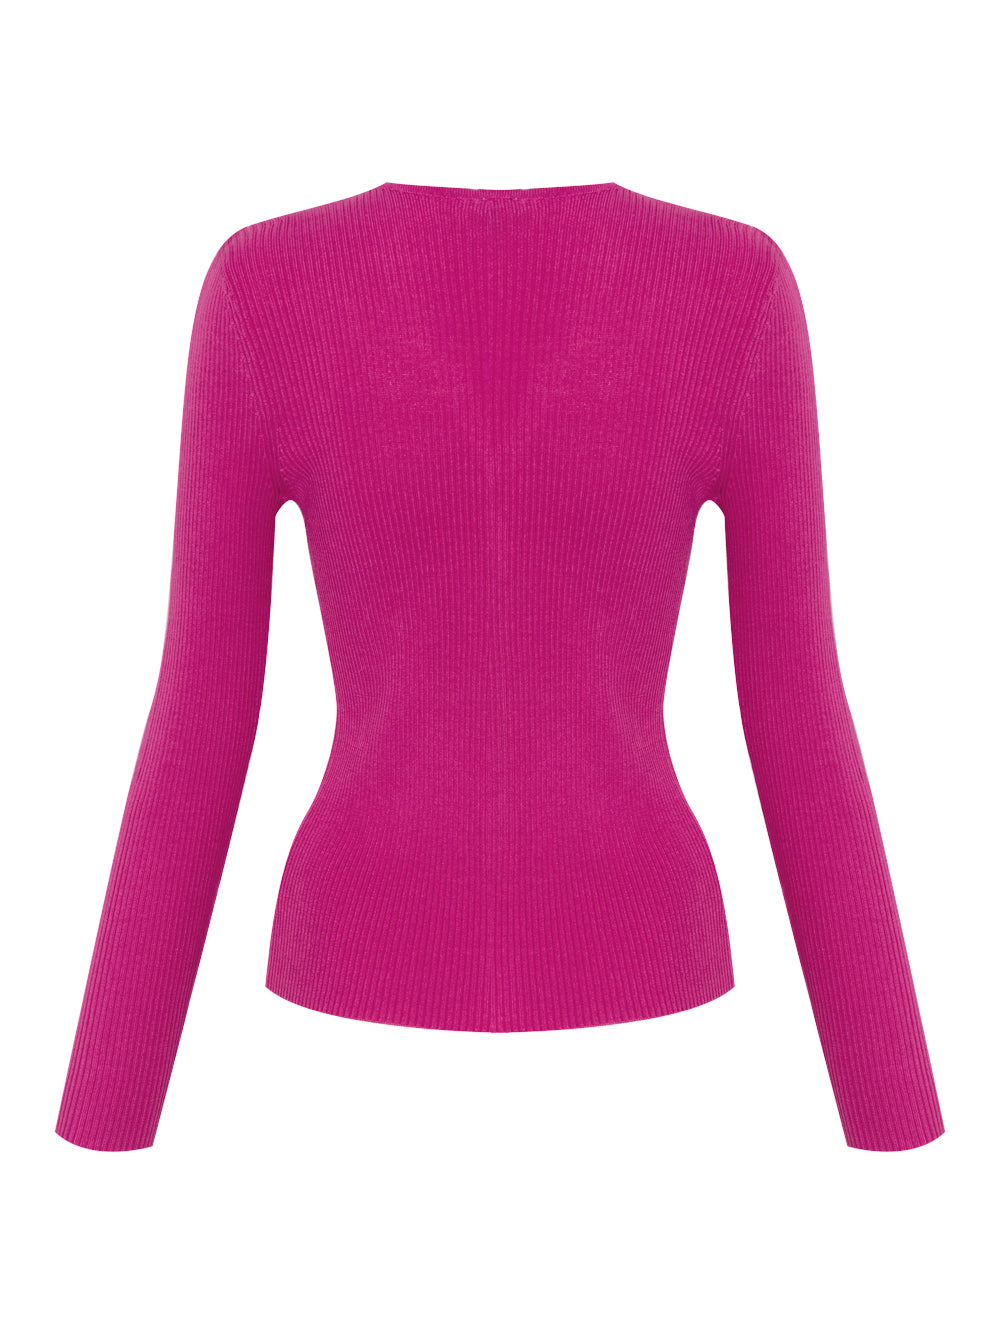 Long Sleeve Ribbed Zip Front Sweater (Shocking Pink)